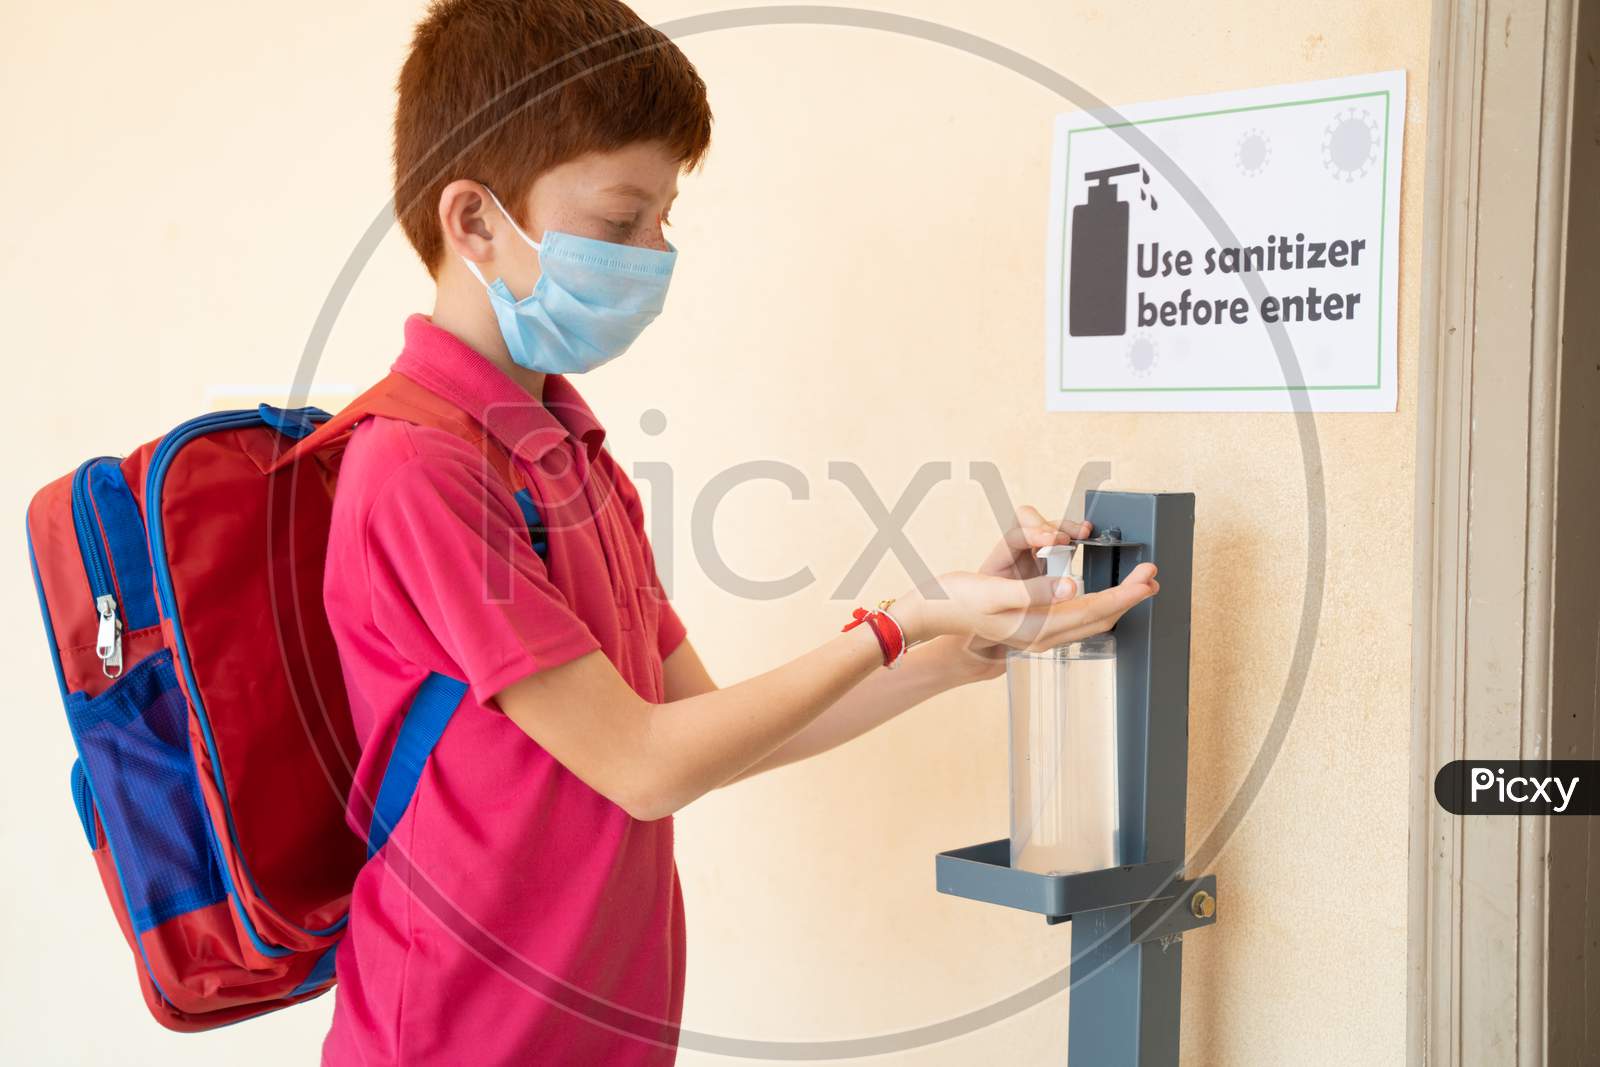 Focus On Sanitizer, Kid With Medical Mask Using Hand Sanitizer Before Entering Classroom - Concept Of Back To School Or School Reopen With Coronavirus Or Covid-19 Safety Measures.